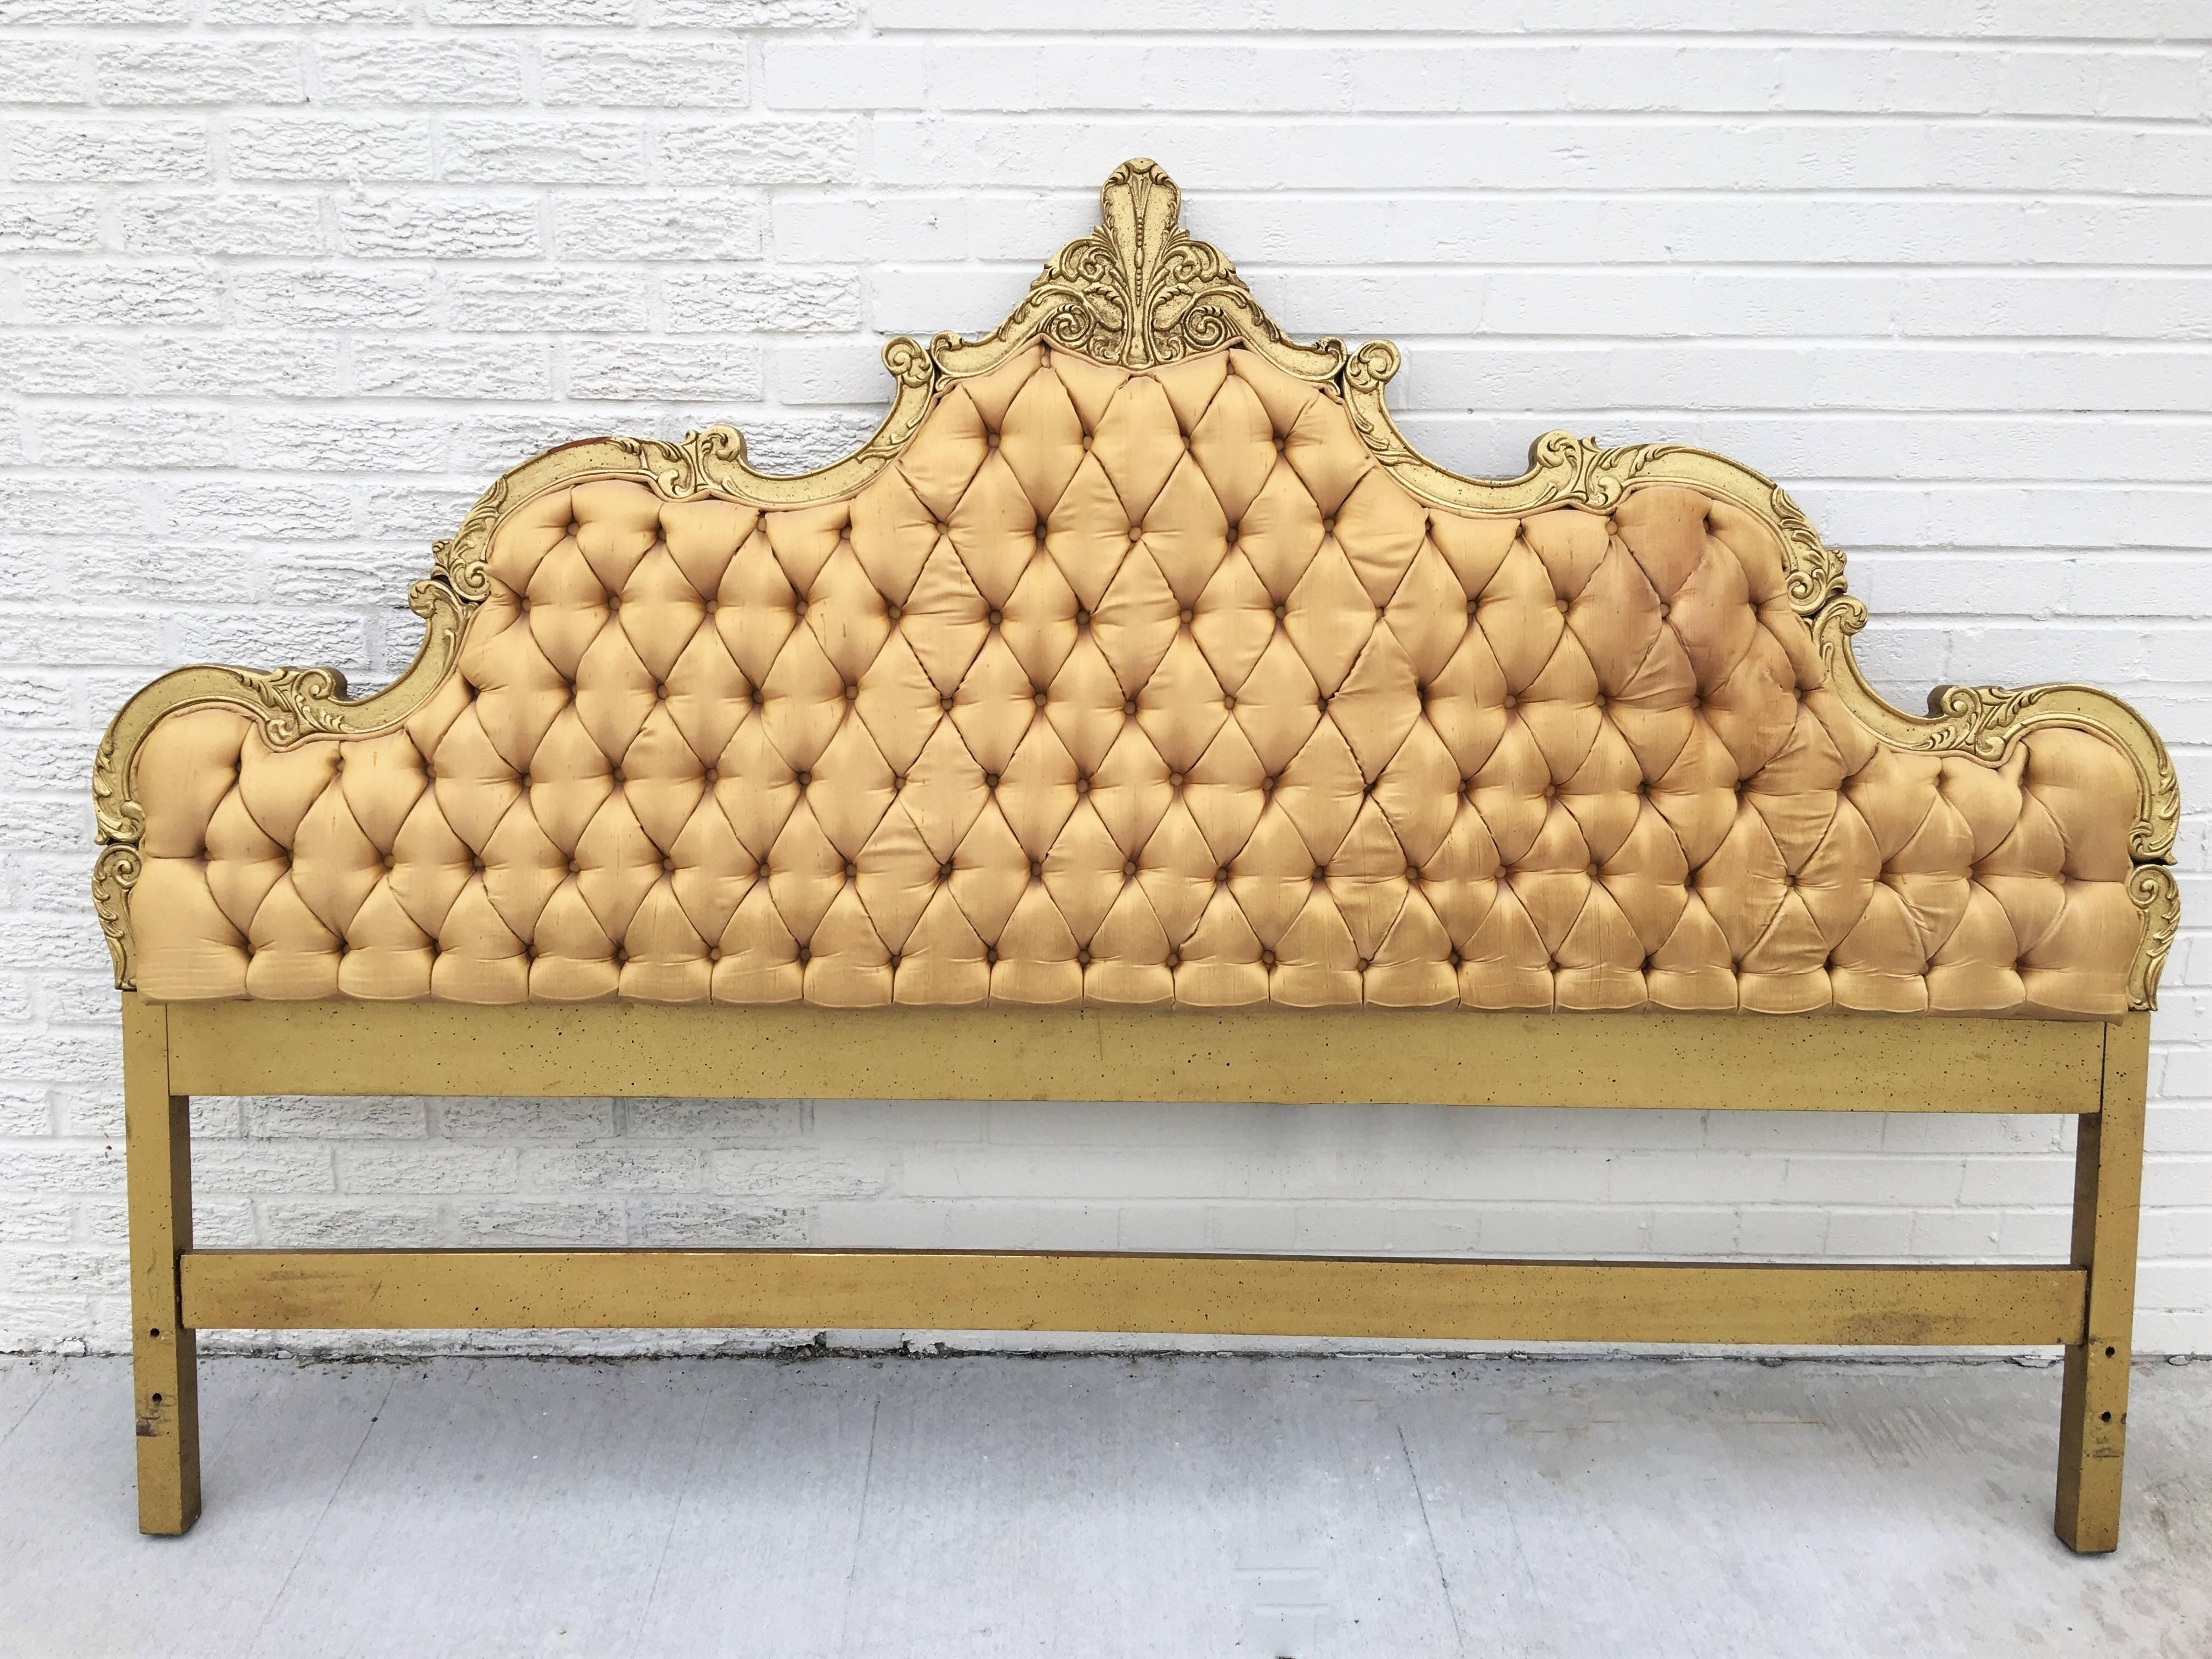 Opulent Hollywood Regency style gold silk tufted king headboard. The headboard is ornate and curvy with a top plume. It’s in its original vintage condition. Upholstery is in good condition with minimal soiling. We offer the finest quality